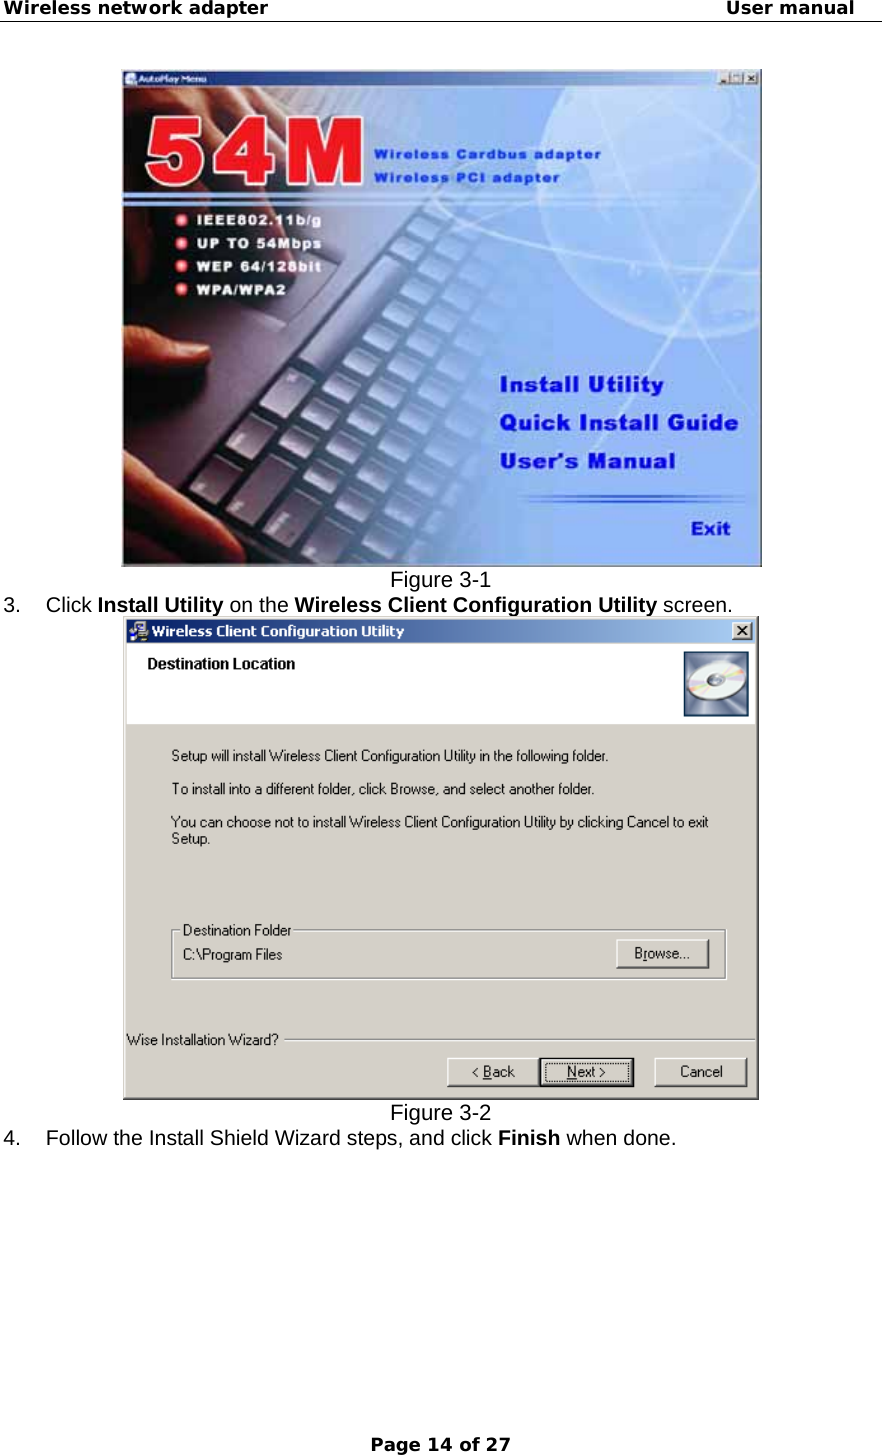 Wireless network adapter                                                  User manual Page 14 of 27  Figure 3-1 3. Click Install Utility on the Wireless Client Configuration Utility screen.  Figure 3-2 4.  Follow the Install Shield Wizard steps, and click Finish when done. 